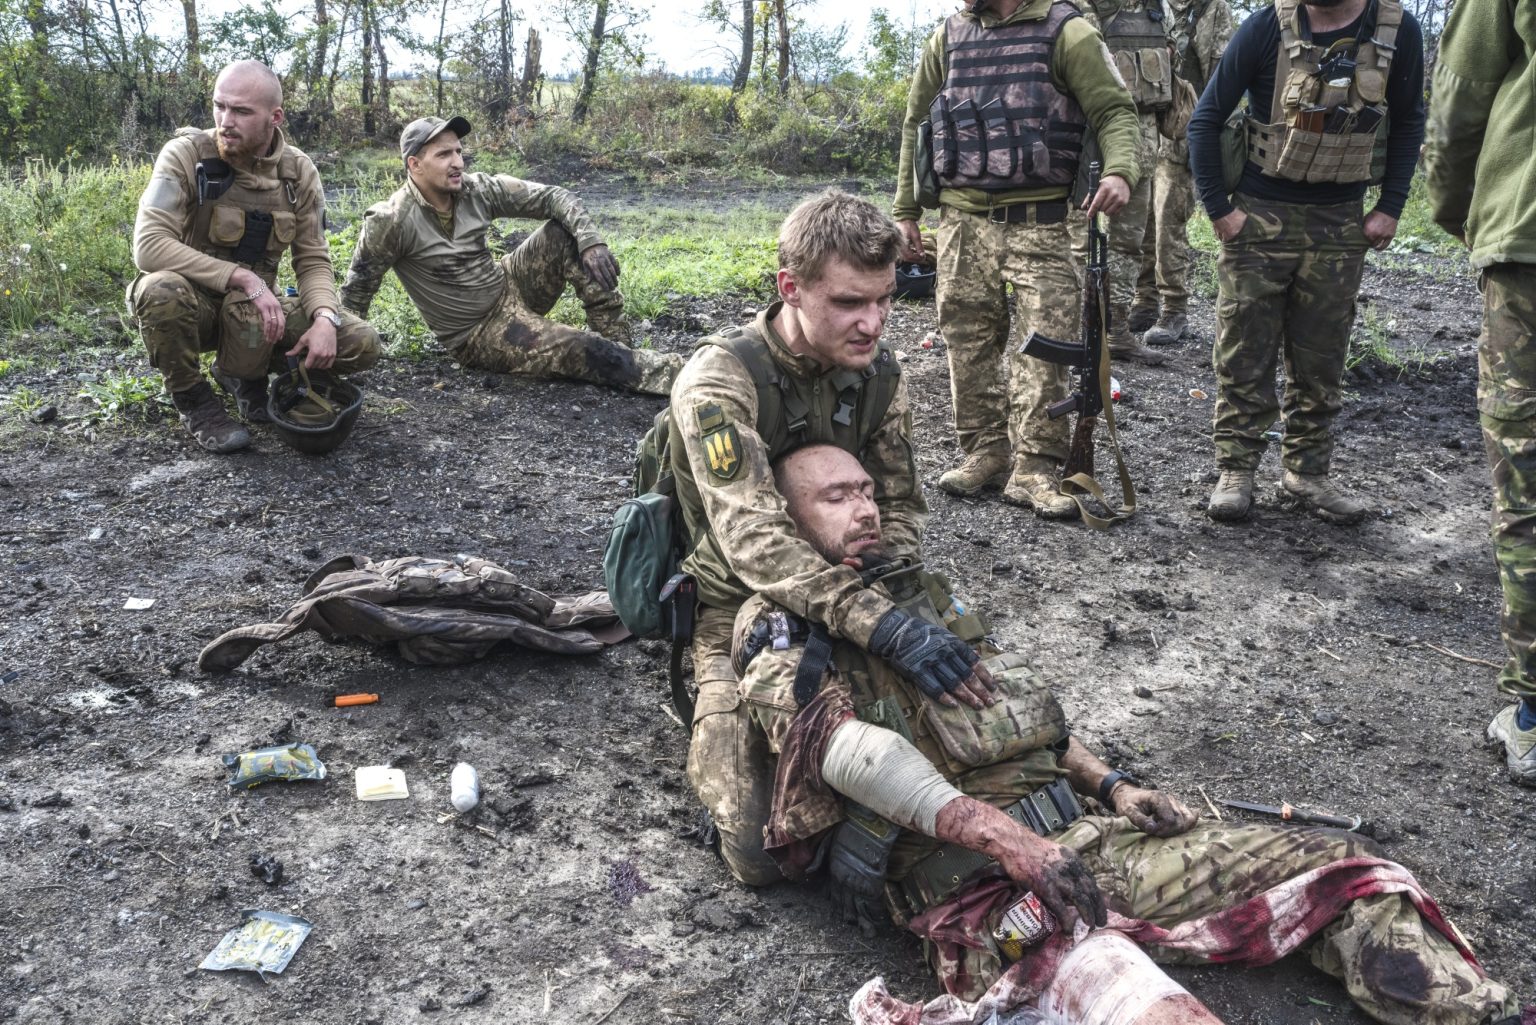 UKRAINE, Sulyhivka village.  September 17, 2022 - Biliy, an Ukrainian serviceman, comforts his comrade, Kostyantyn Rusanov, nom de guerre Nemo, after he received serious injuries from the blast of an anti-personnel mine, south of Sulyhivka village.